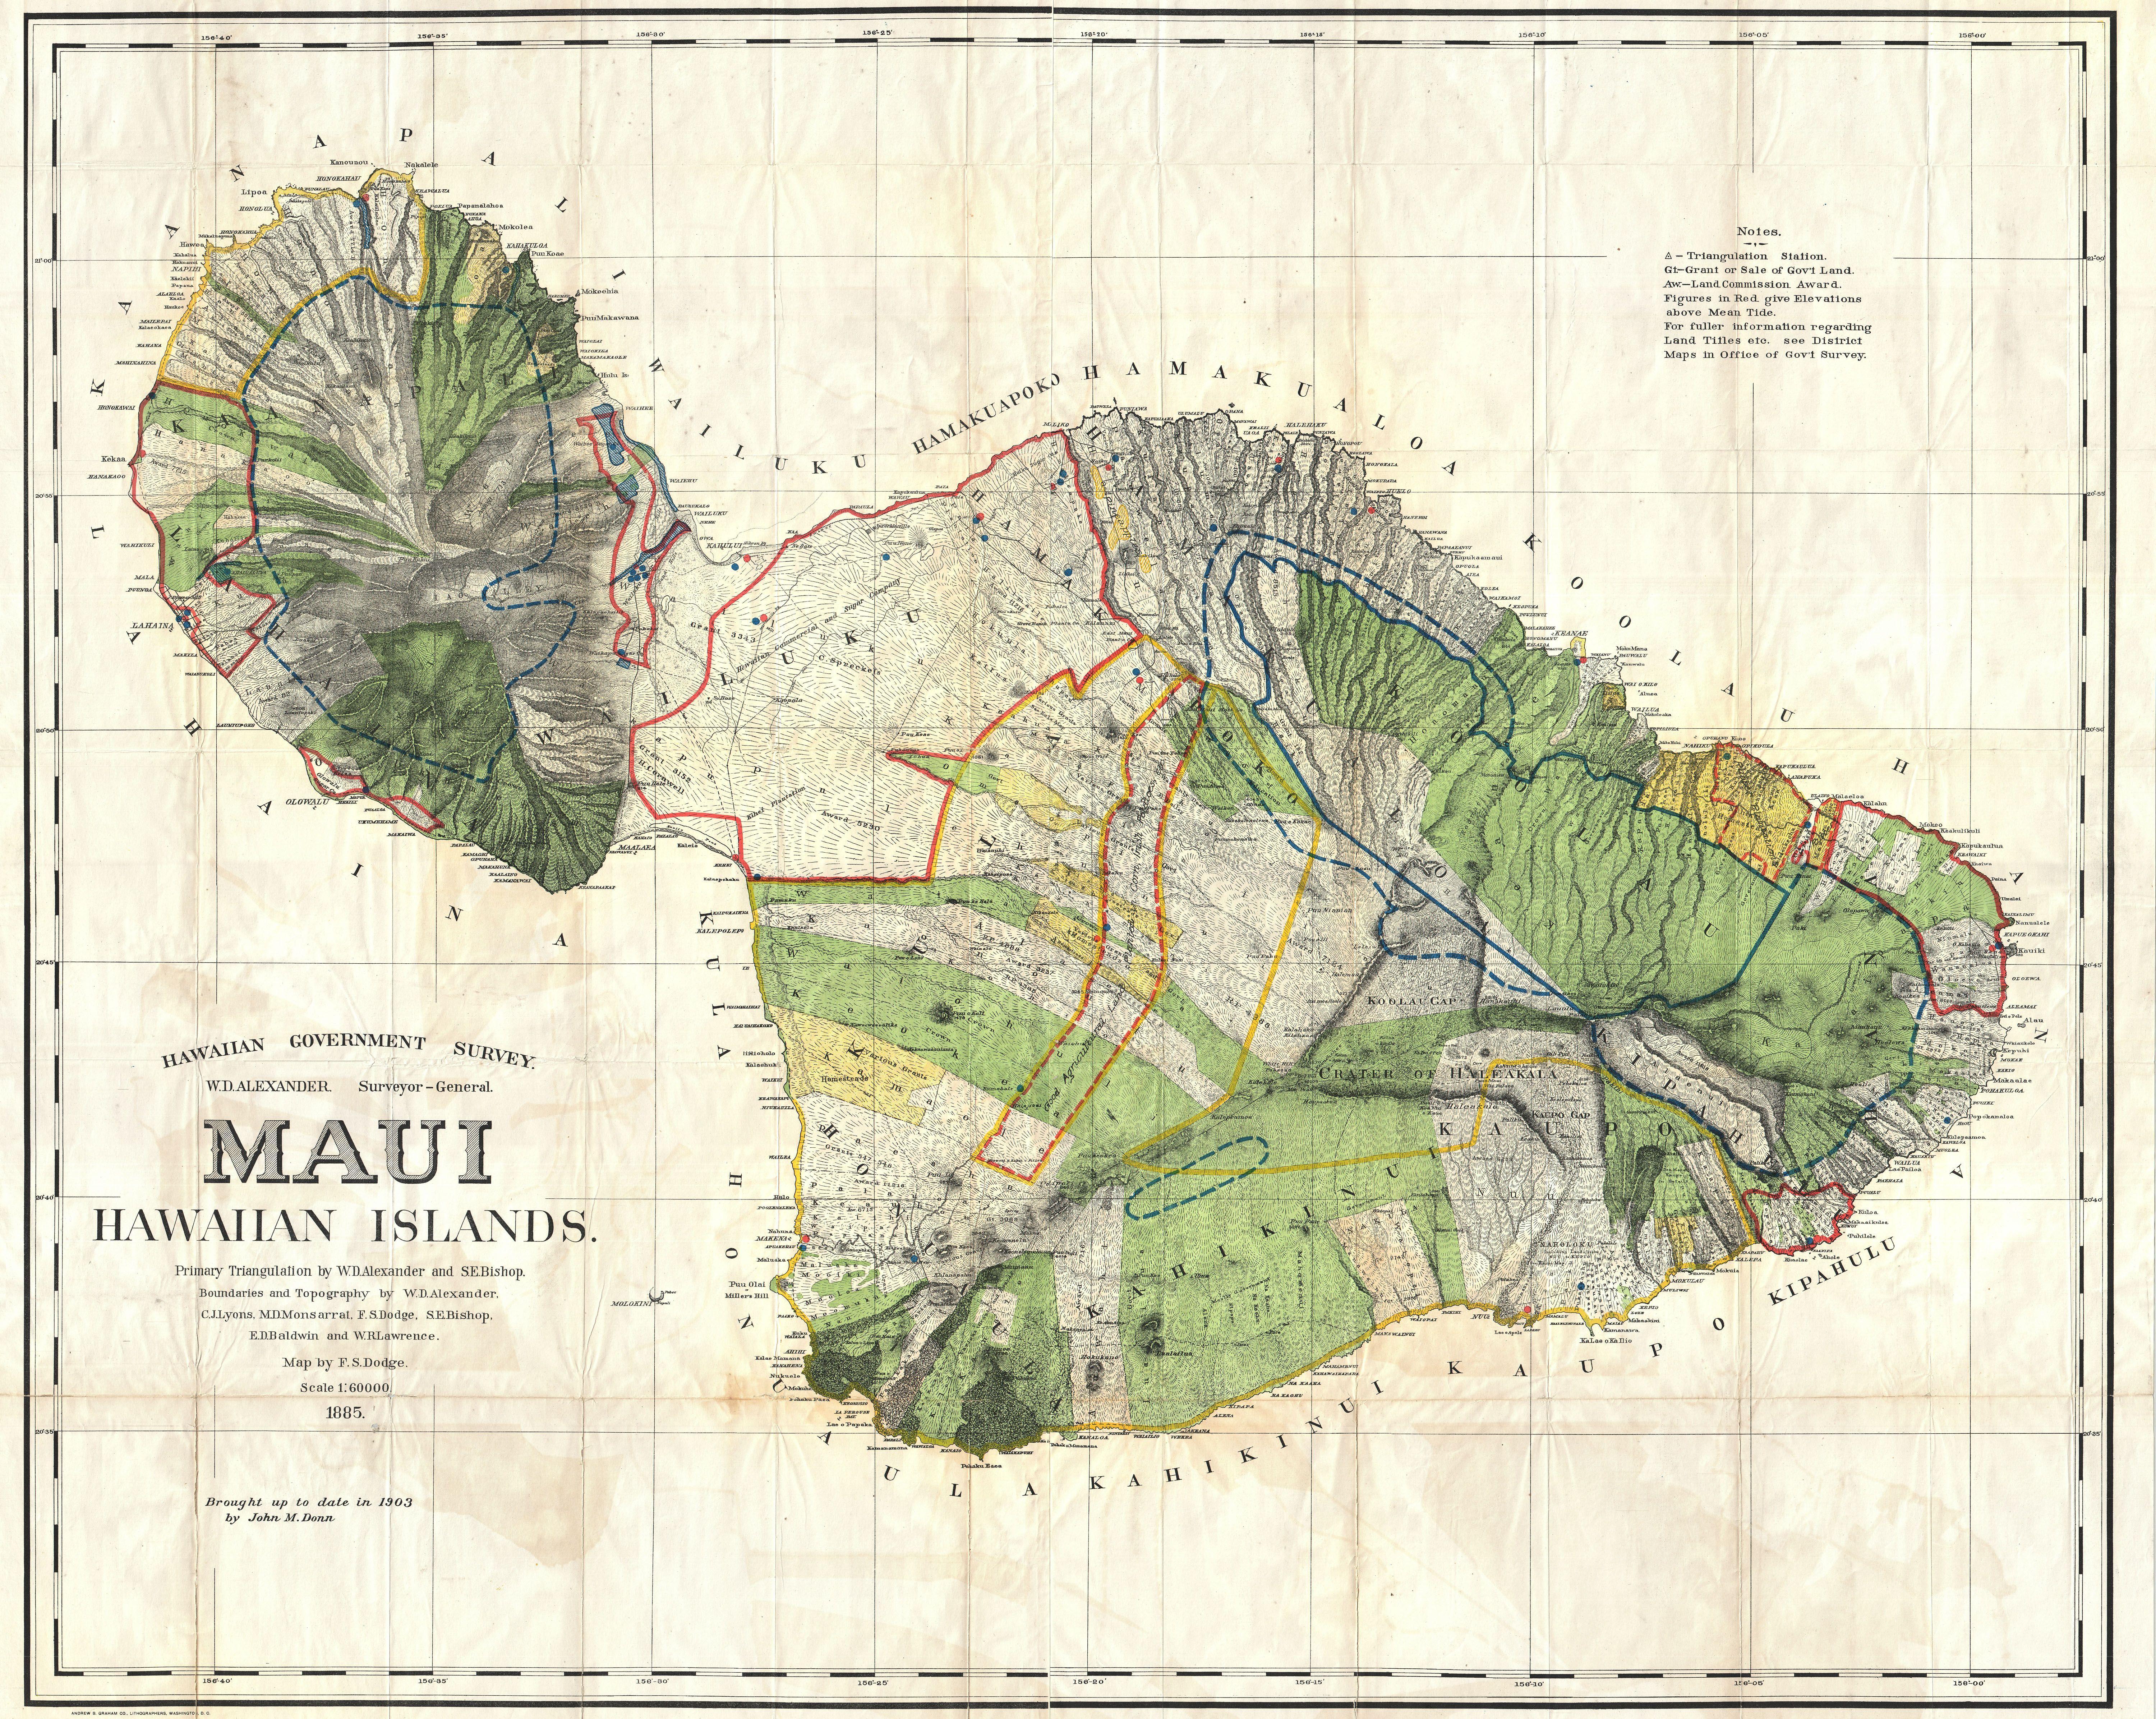 Photo source: https://upload.wikimedia.org/wikipedia/commons/6/6e/1885_De_Witt_Alexander_Wall_Map_of_Maui,_Hawaii_-_Geographicus_-_Maui-lo-1885.jpg google images, labeled for reuse, 12.2015